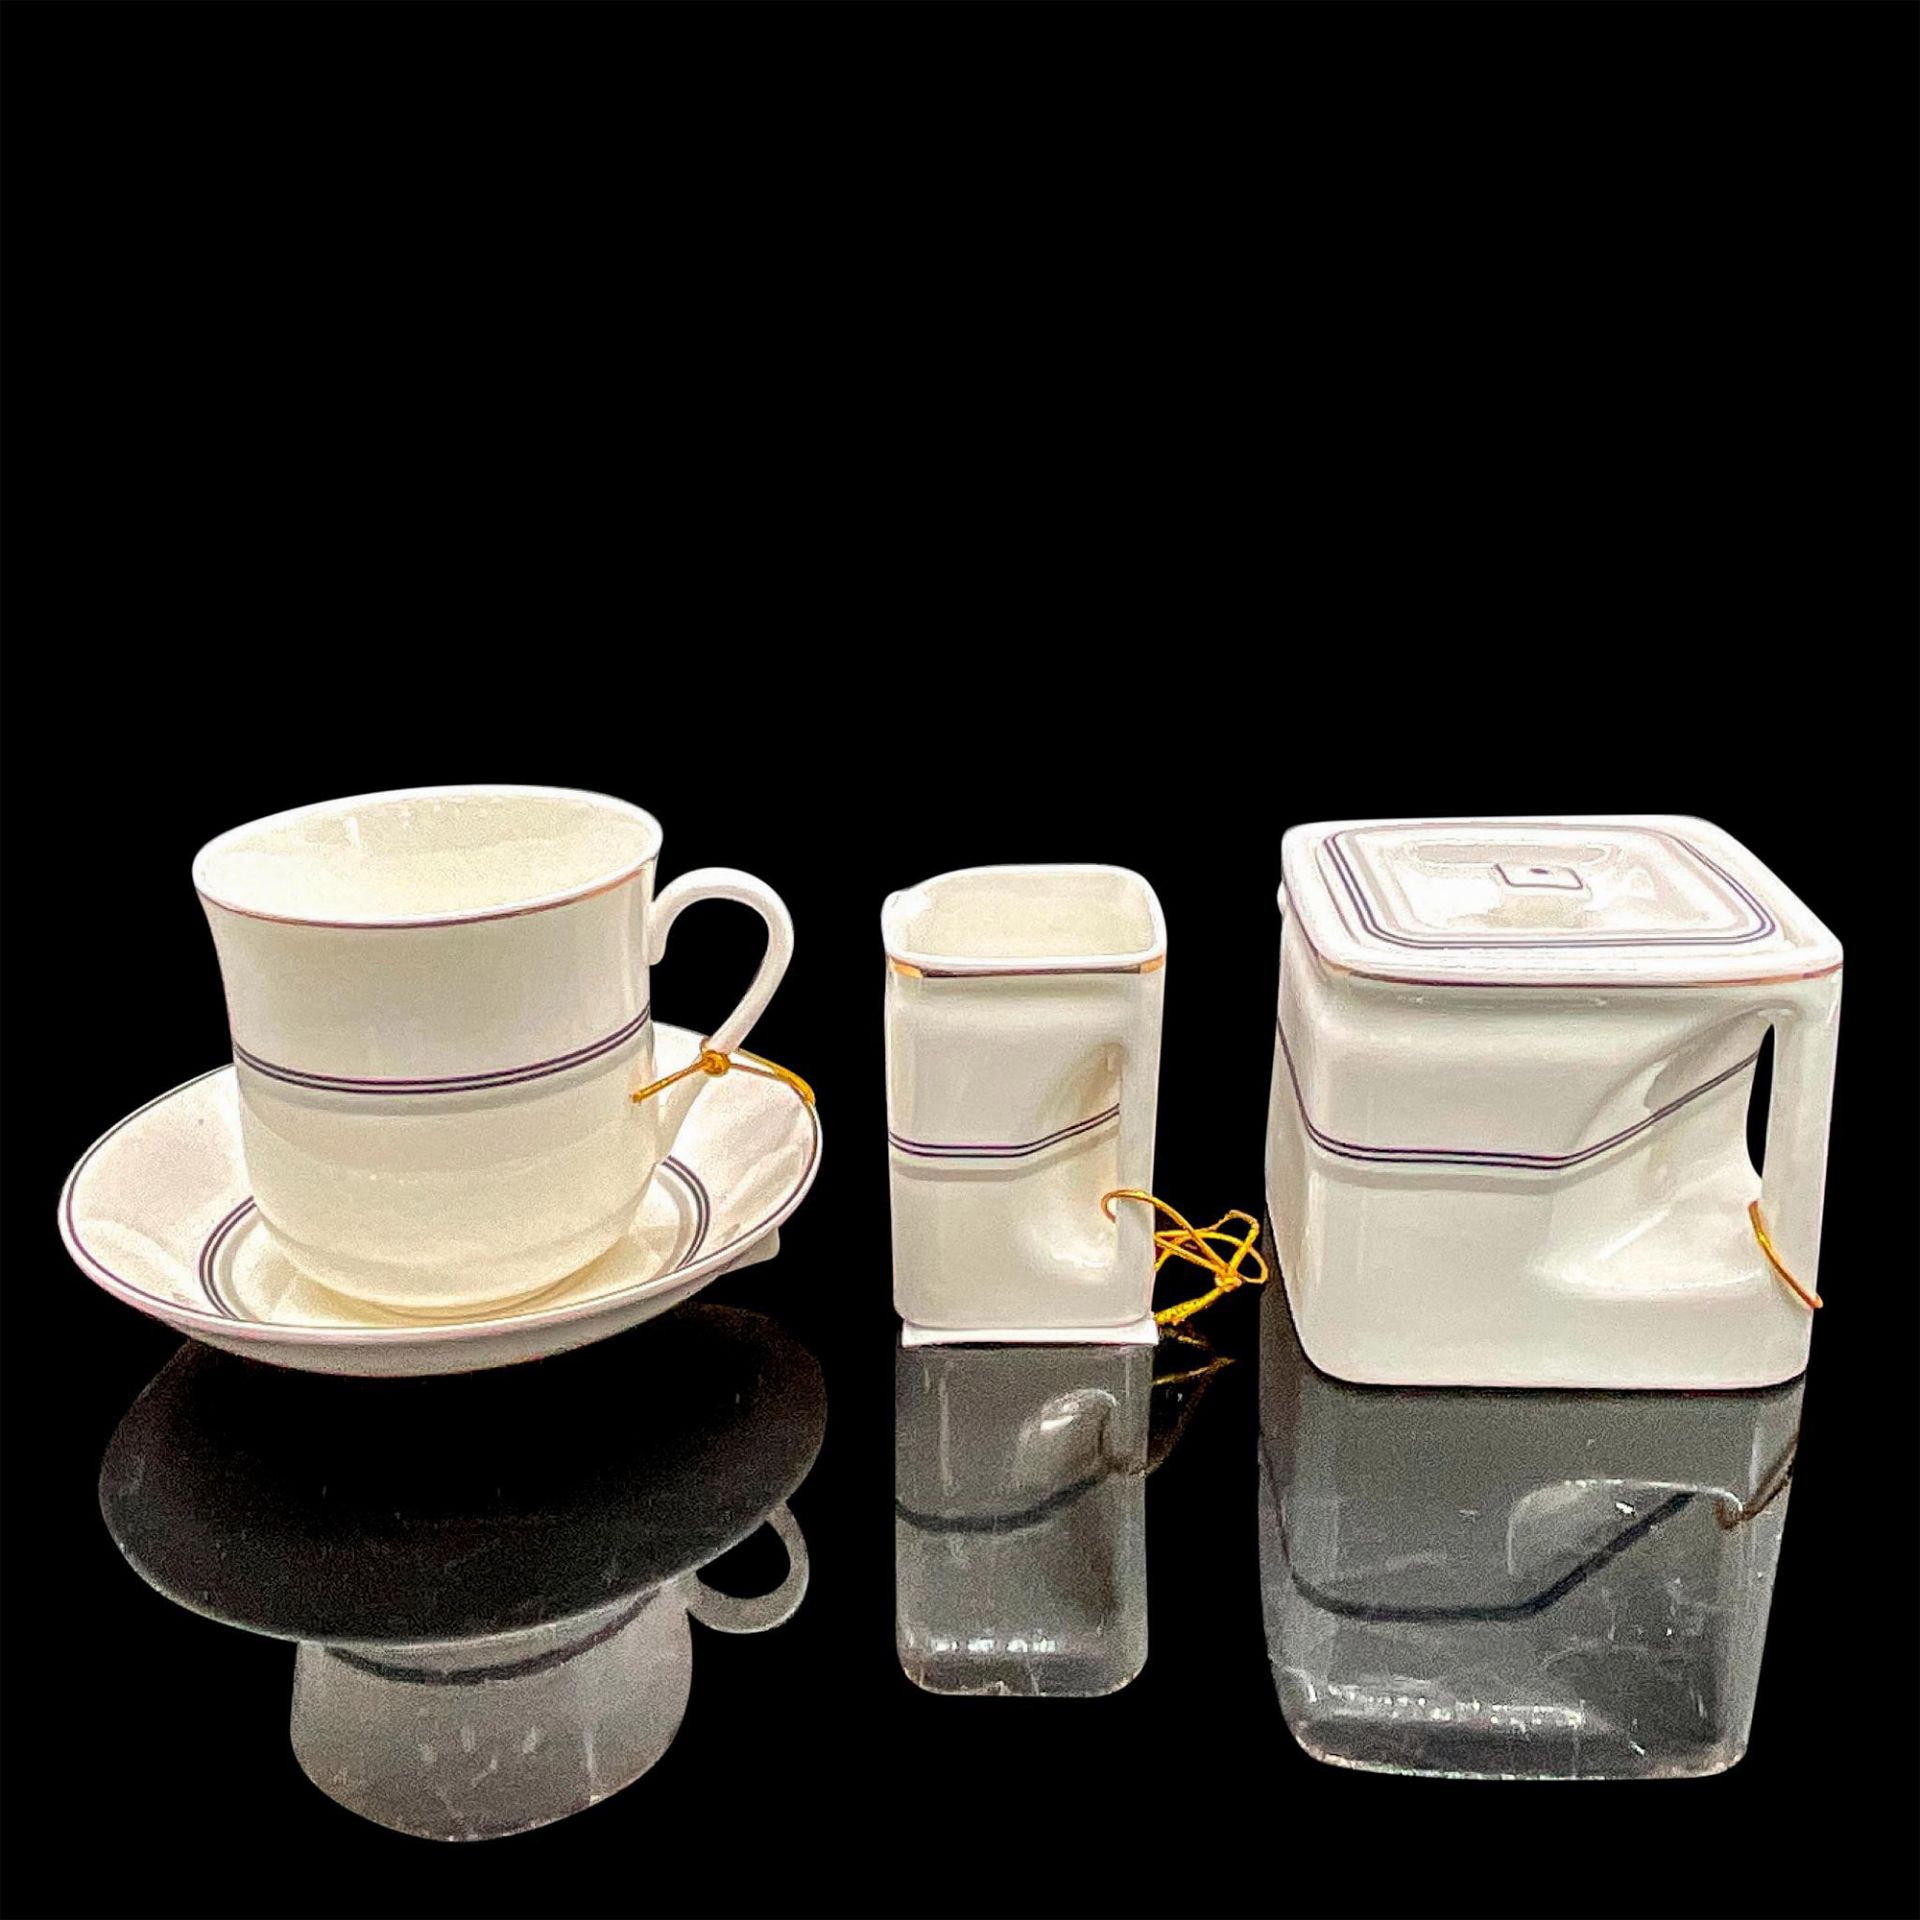 6pc Tea Serving Set, Queen Mary and Titanic Replicas - Image 2 of 16